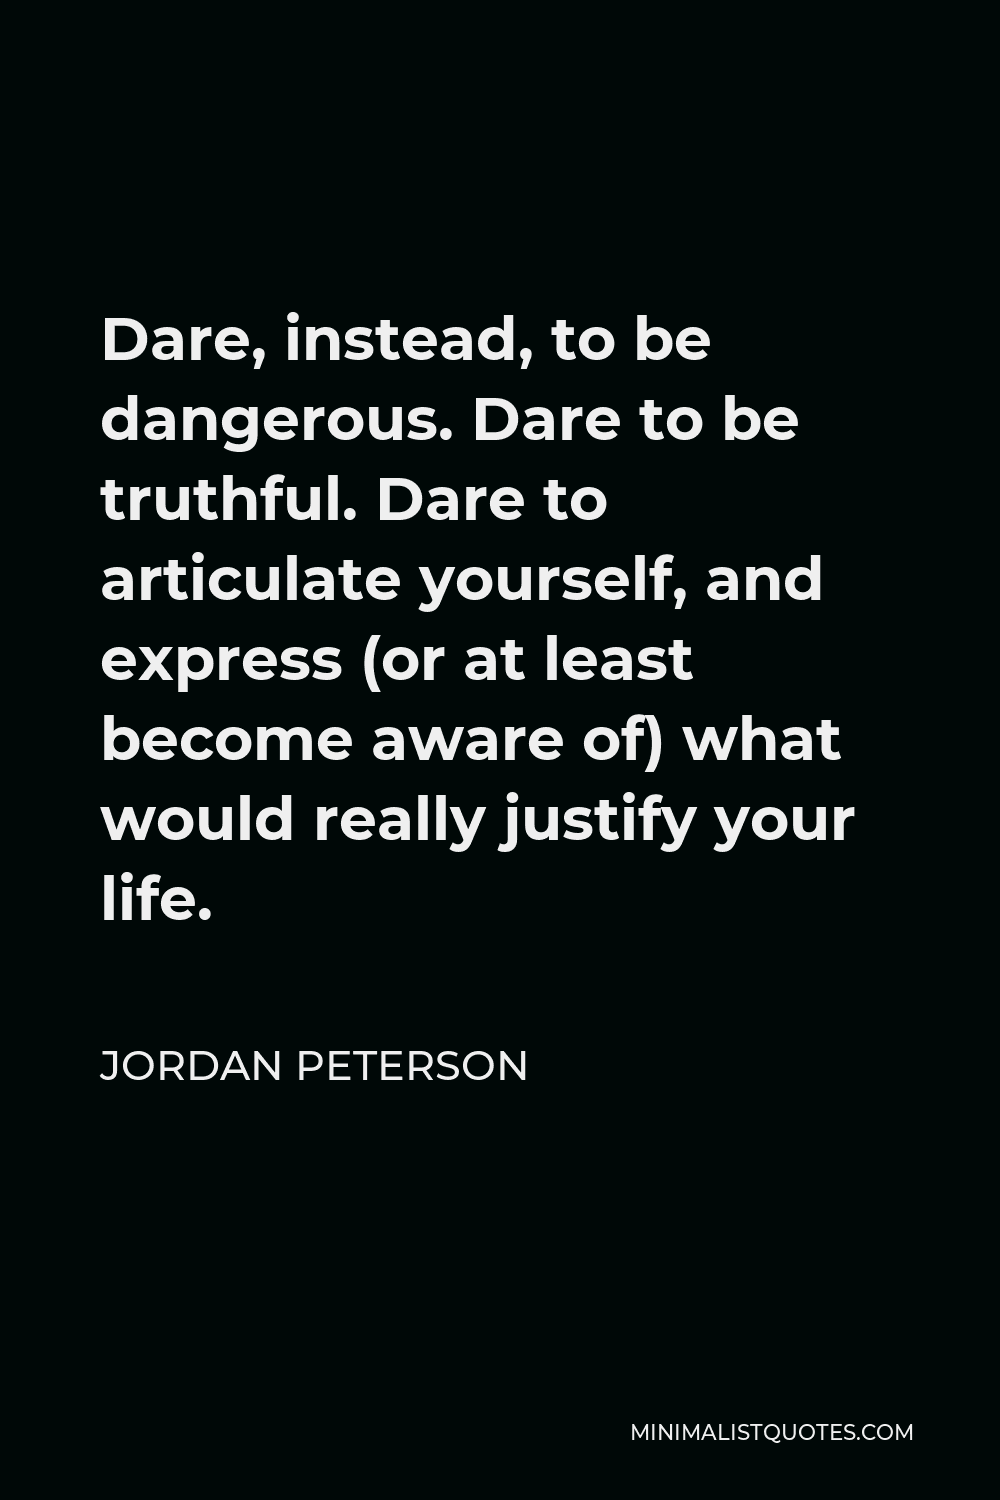 Jordan Peterson Quote - Dare, instead, to be dangerous. Dare to be truthful. Dare to articulate yourself, and express (or at least become aware of) what would really justify your life.